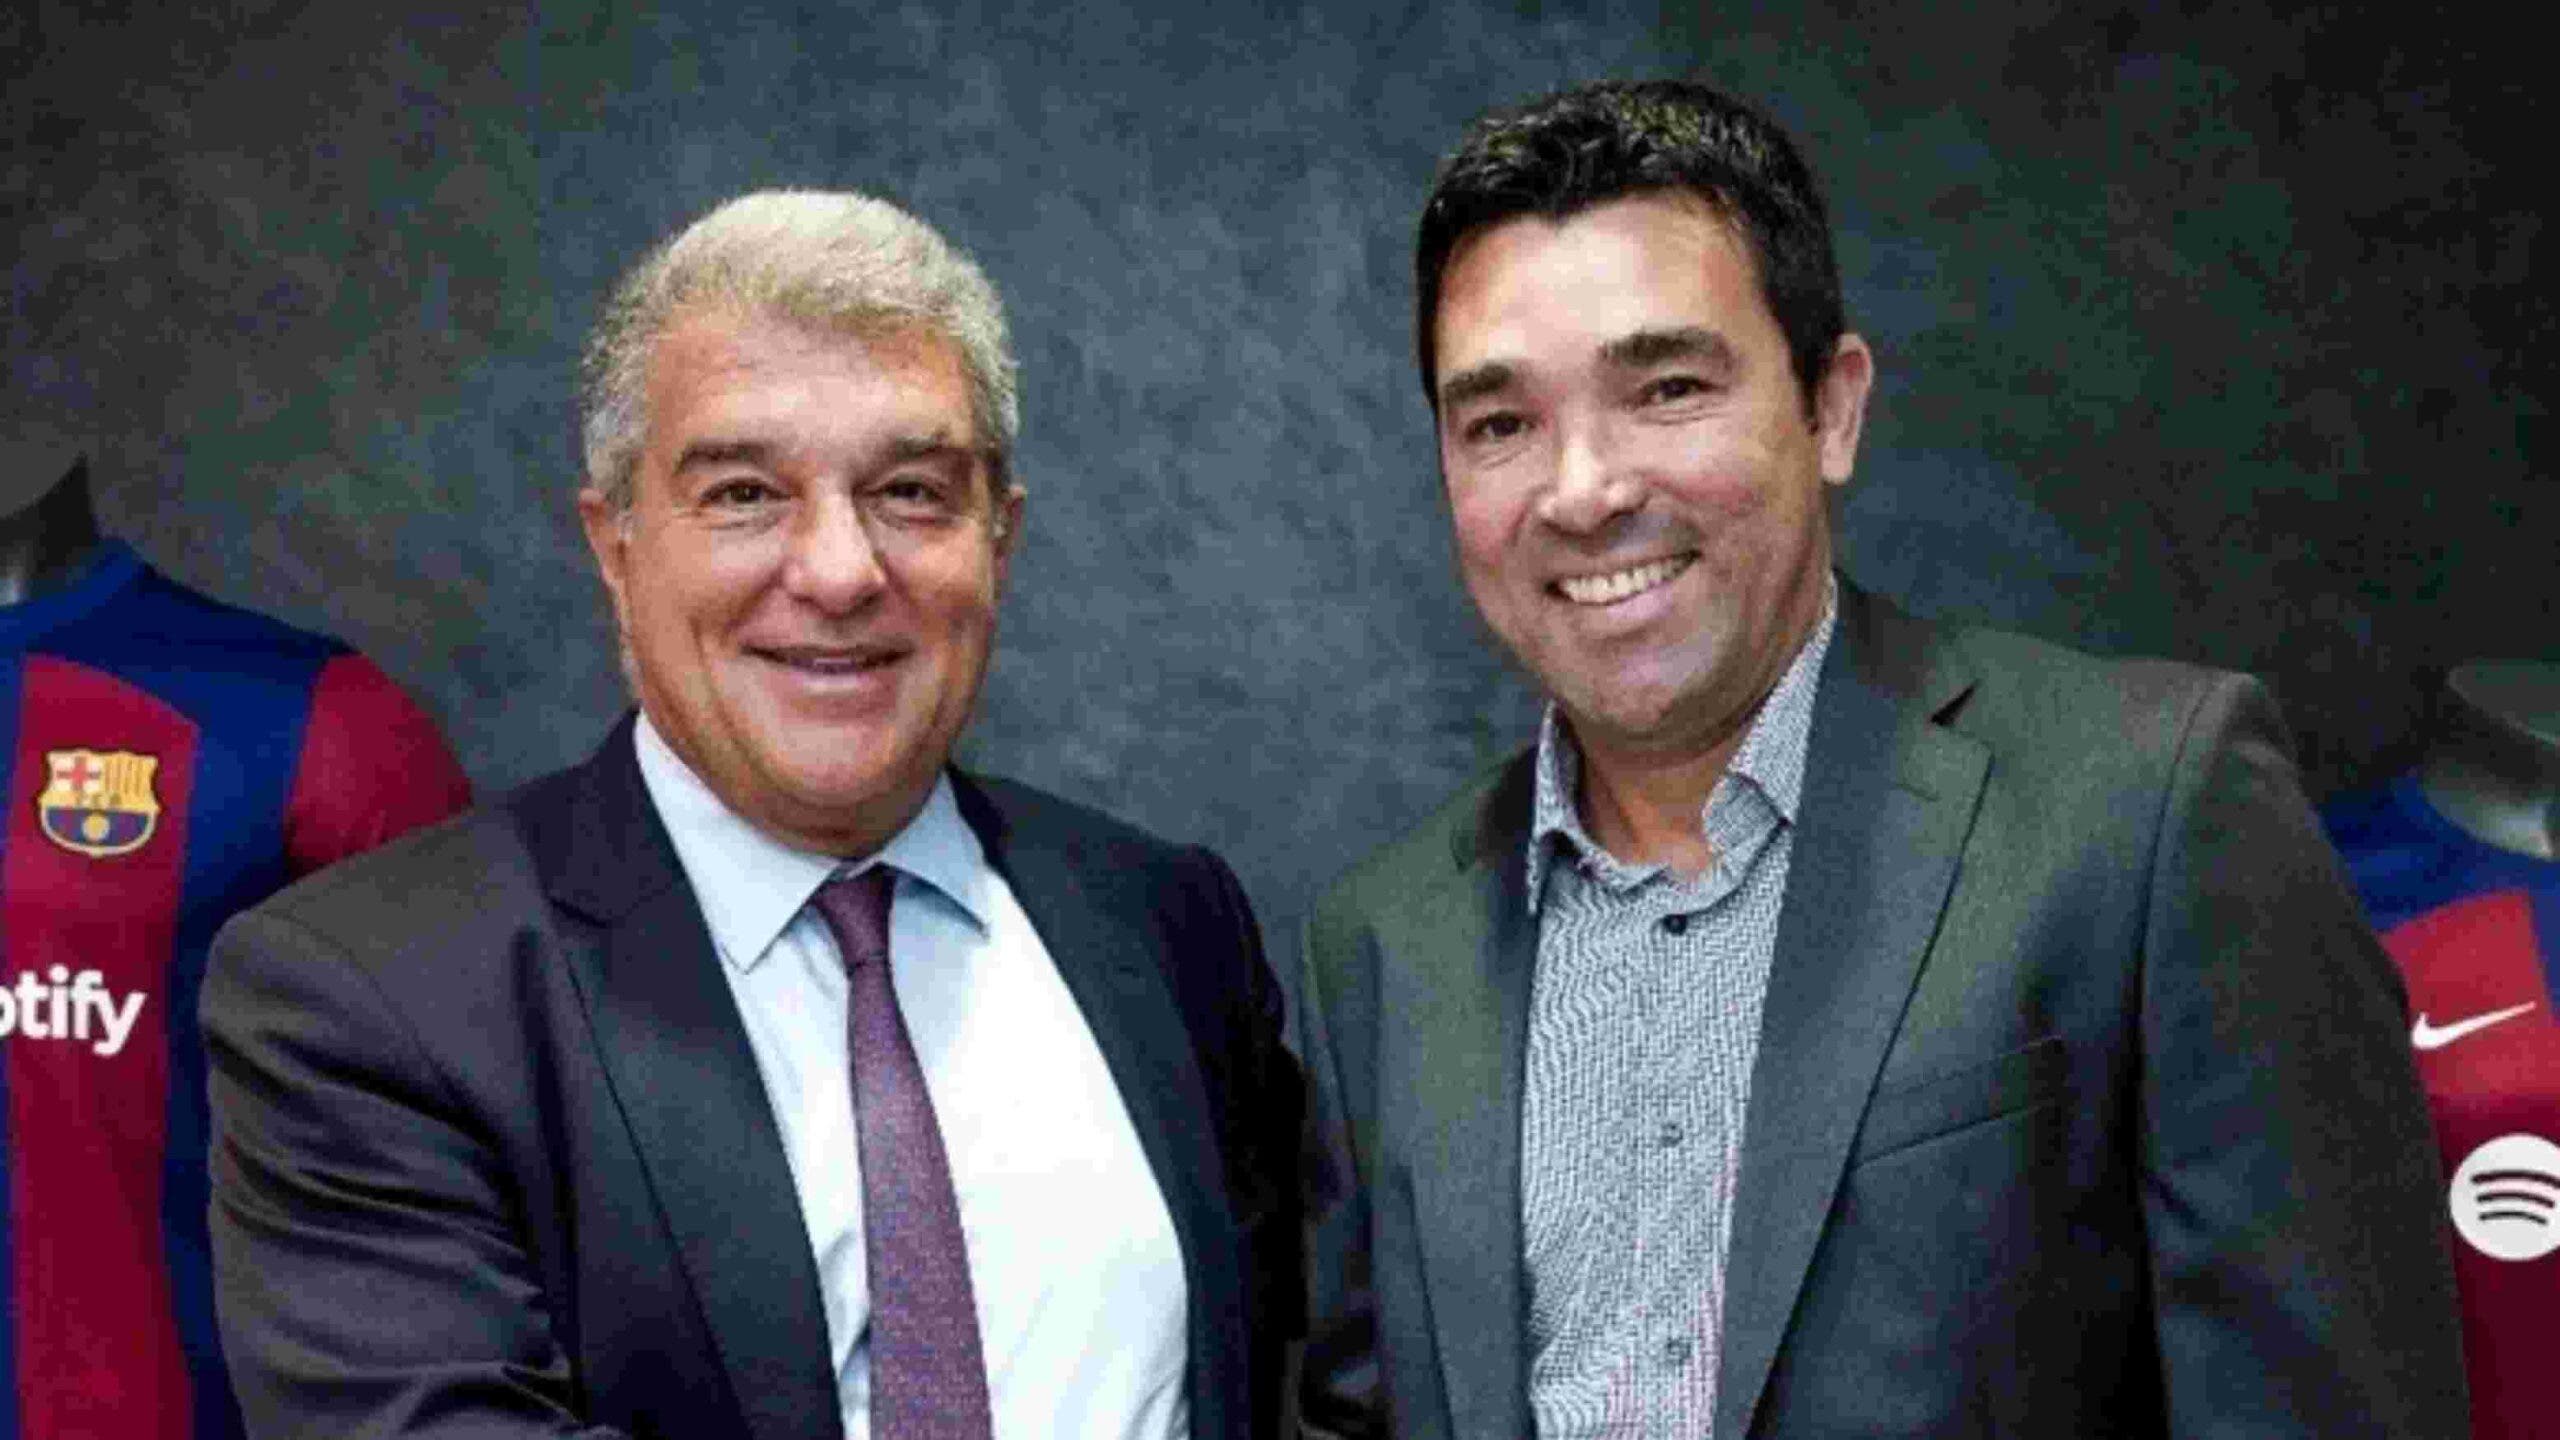 Deco oversees the signing for Barça in Mallorca
	

